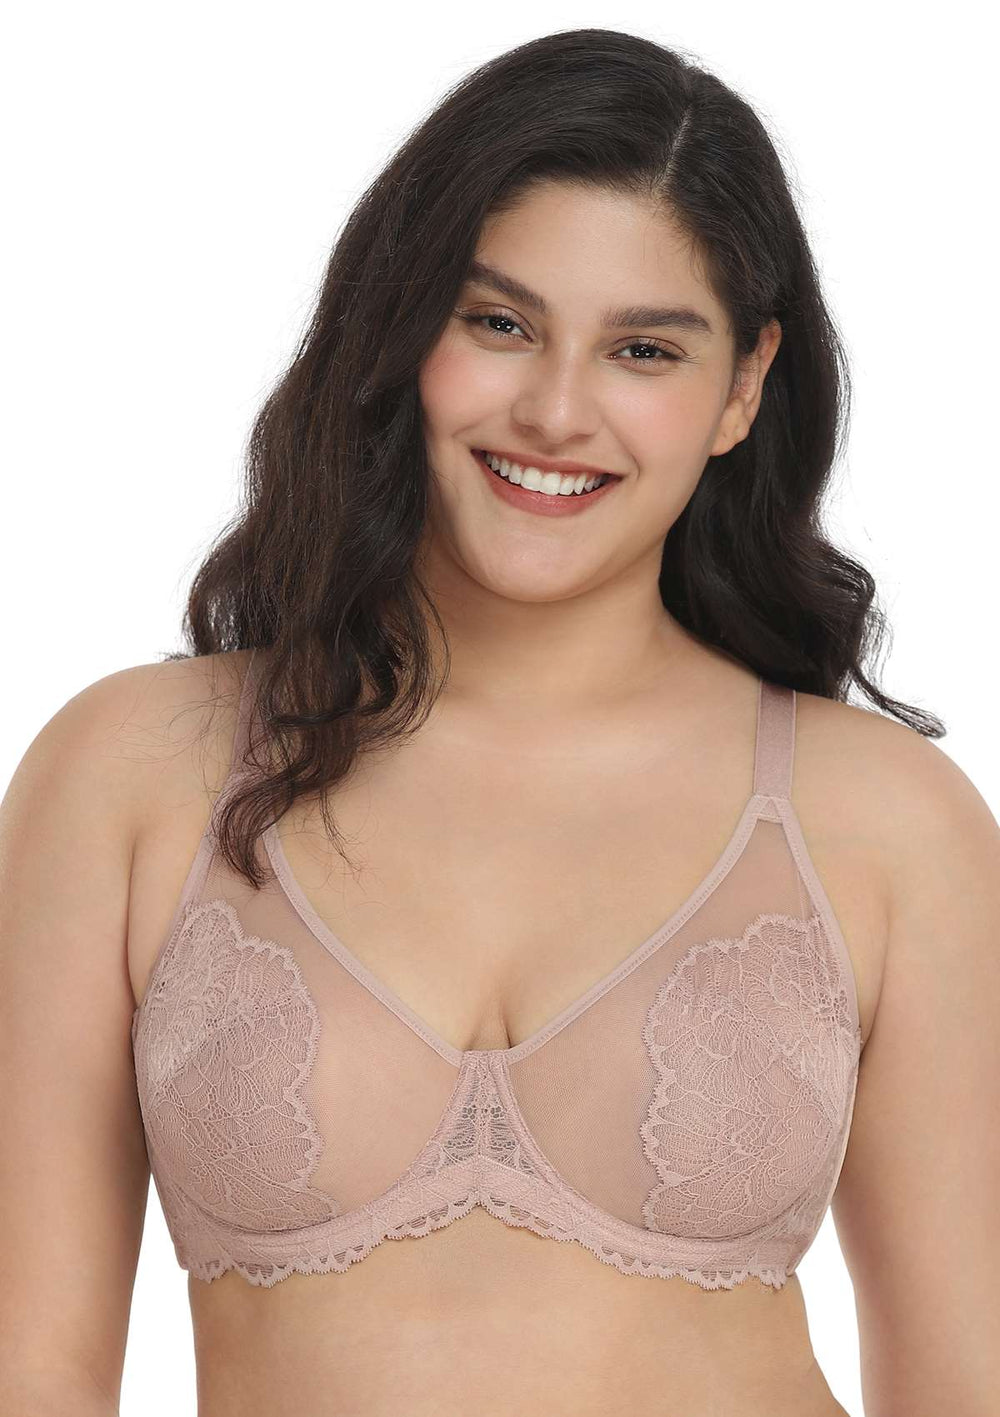 46ddd Bras, It is available in black and blush and often offers